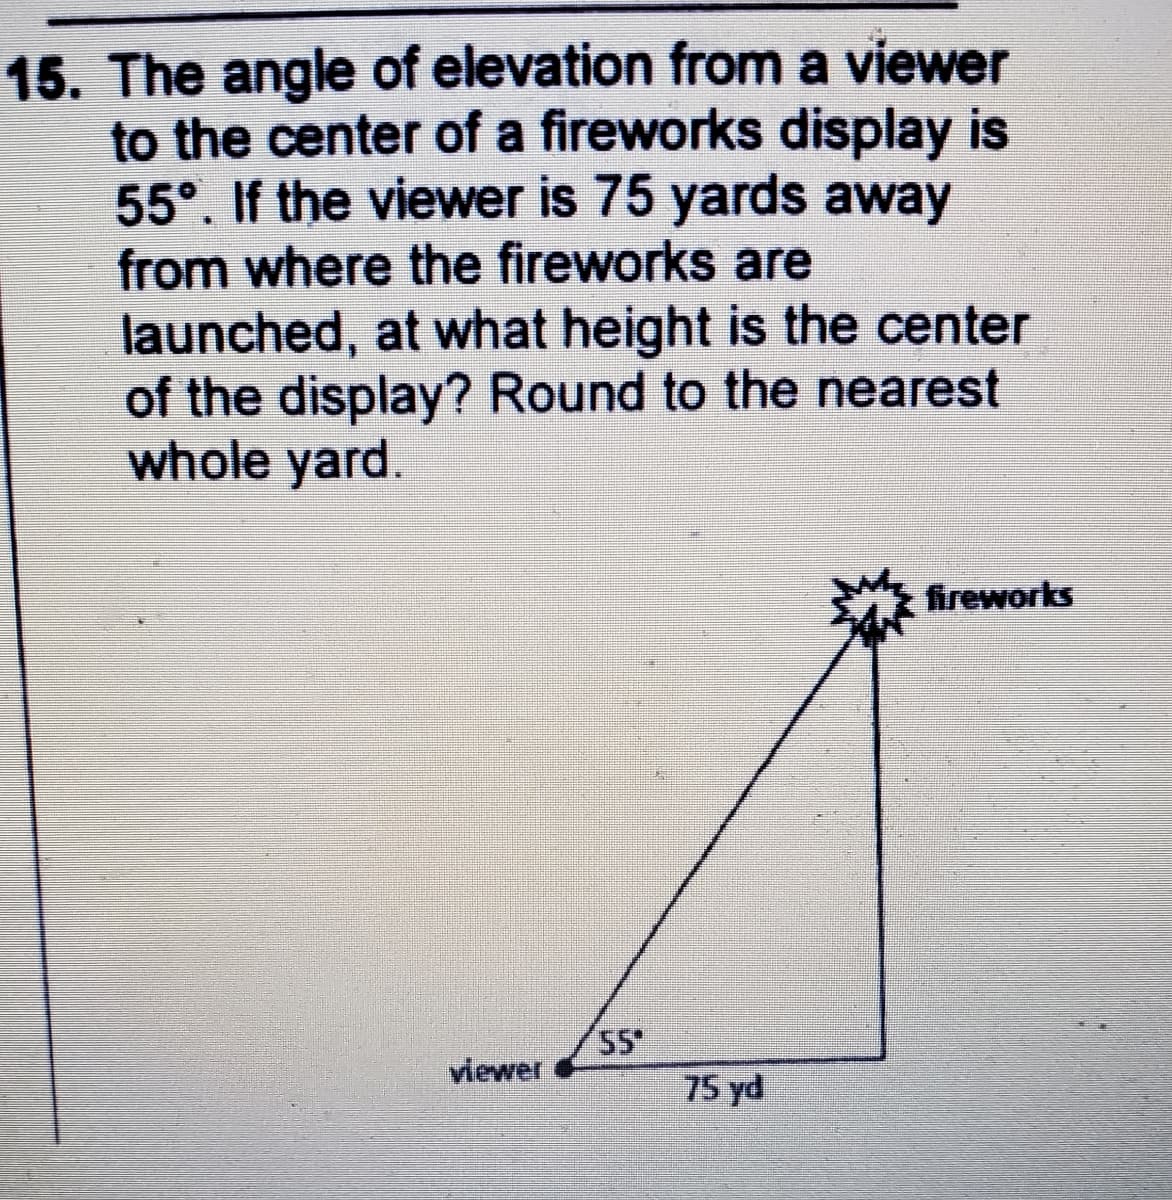 15. The angle of elevation from a viewer
to the center of a fireworks display is
55°. If the viewer is 75 yards away
from where the fireworks are
launched, at what height is the center
of the display? Round to the nearest
whole yard.
fireworks
55
75 yd
viewer
